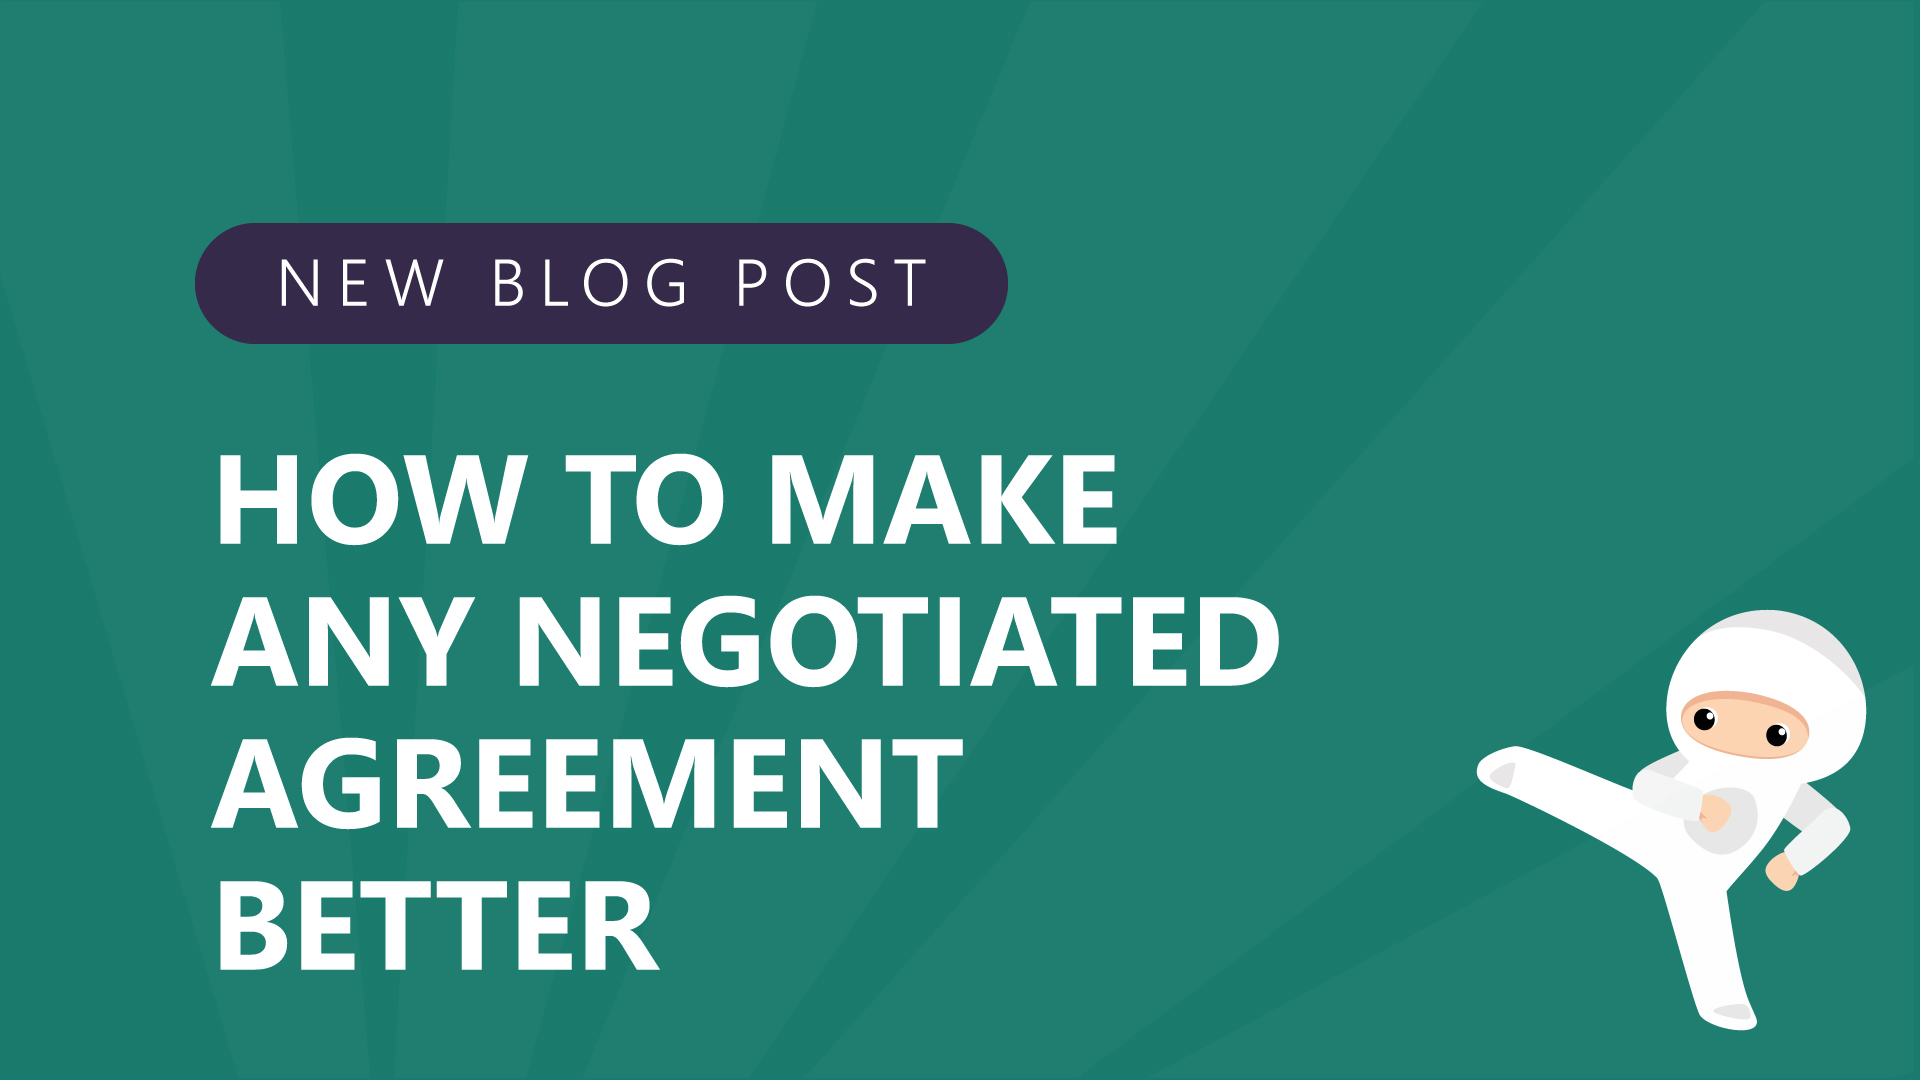 48-How-to-Make-ANY-Negotiated-Agreement-Better.jpg